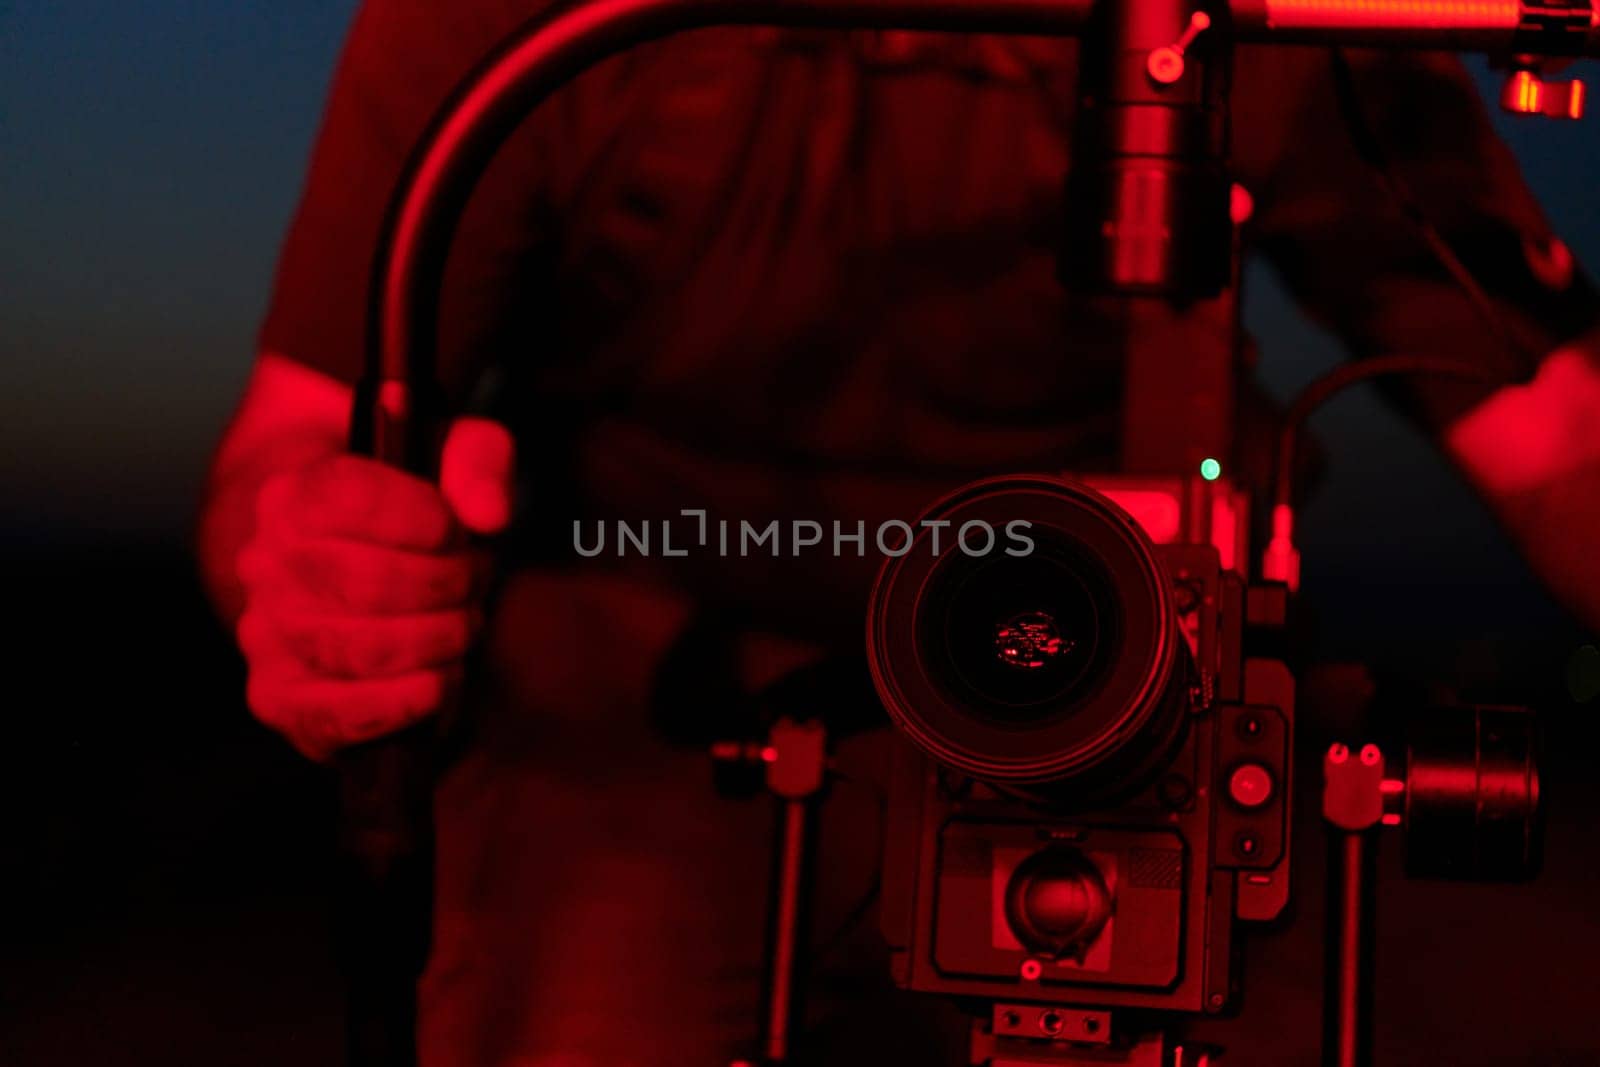 A skilled videographer captures the intensity of athletes running, illuminated by vibrant red lights, encapsulating the energy and determination of their nighttime training session.